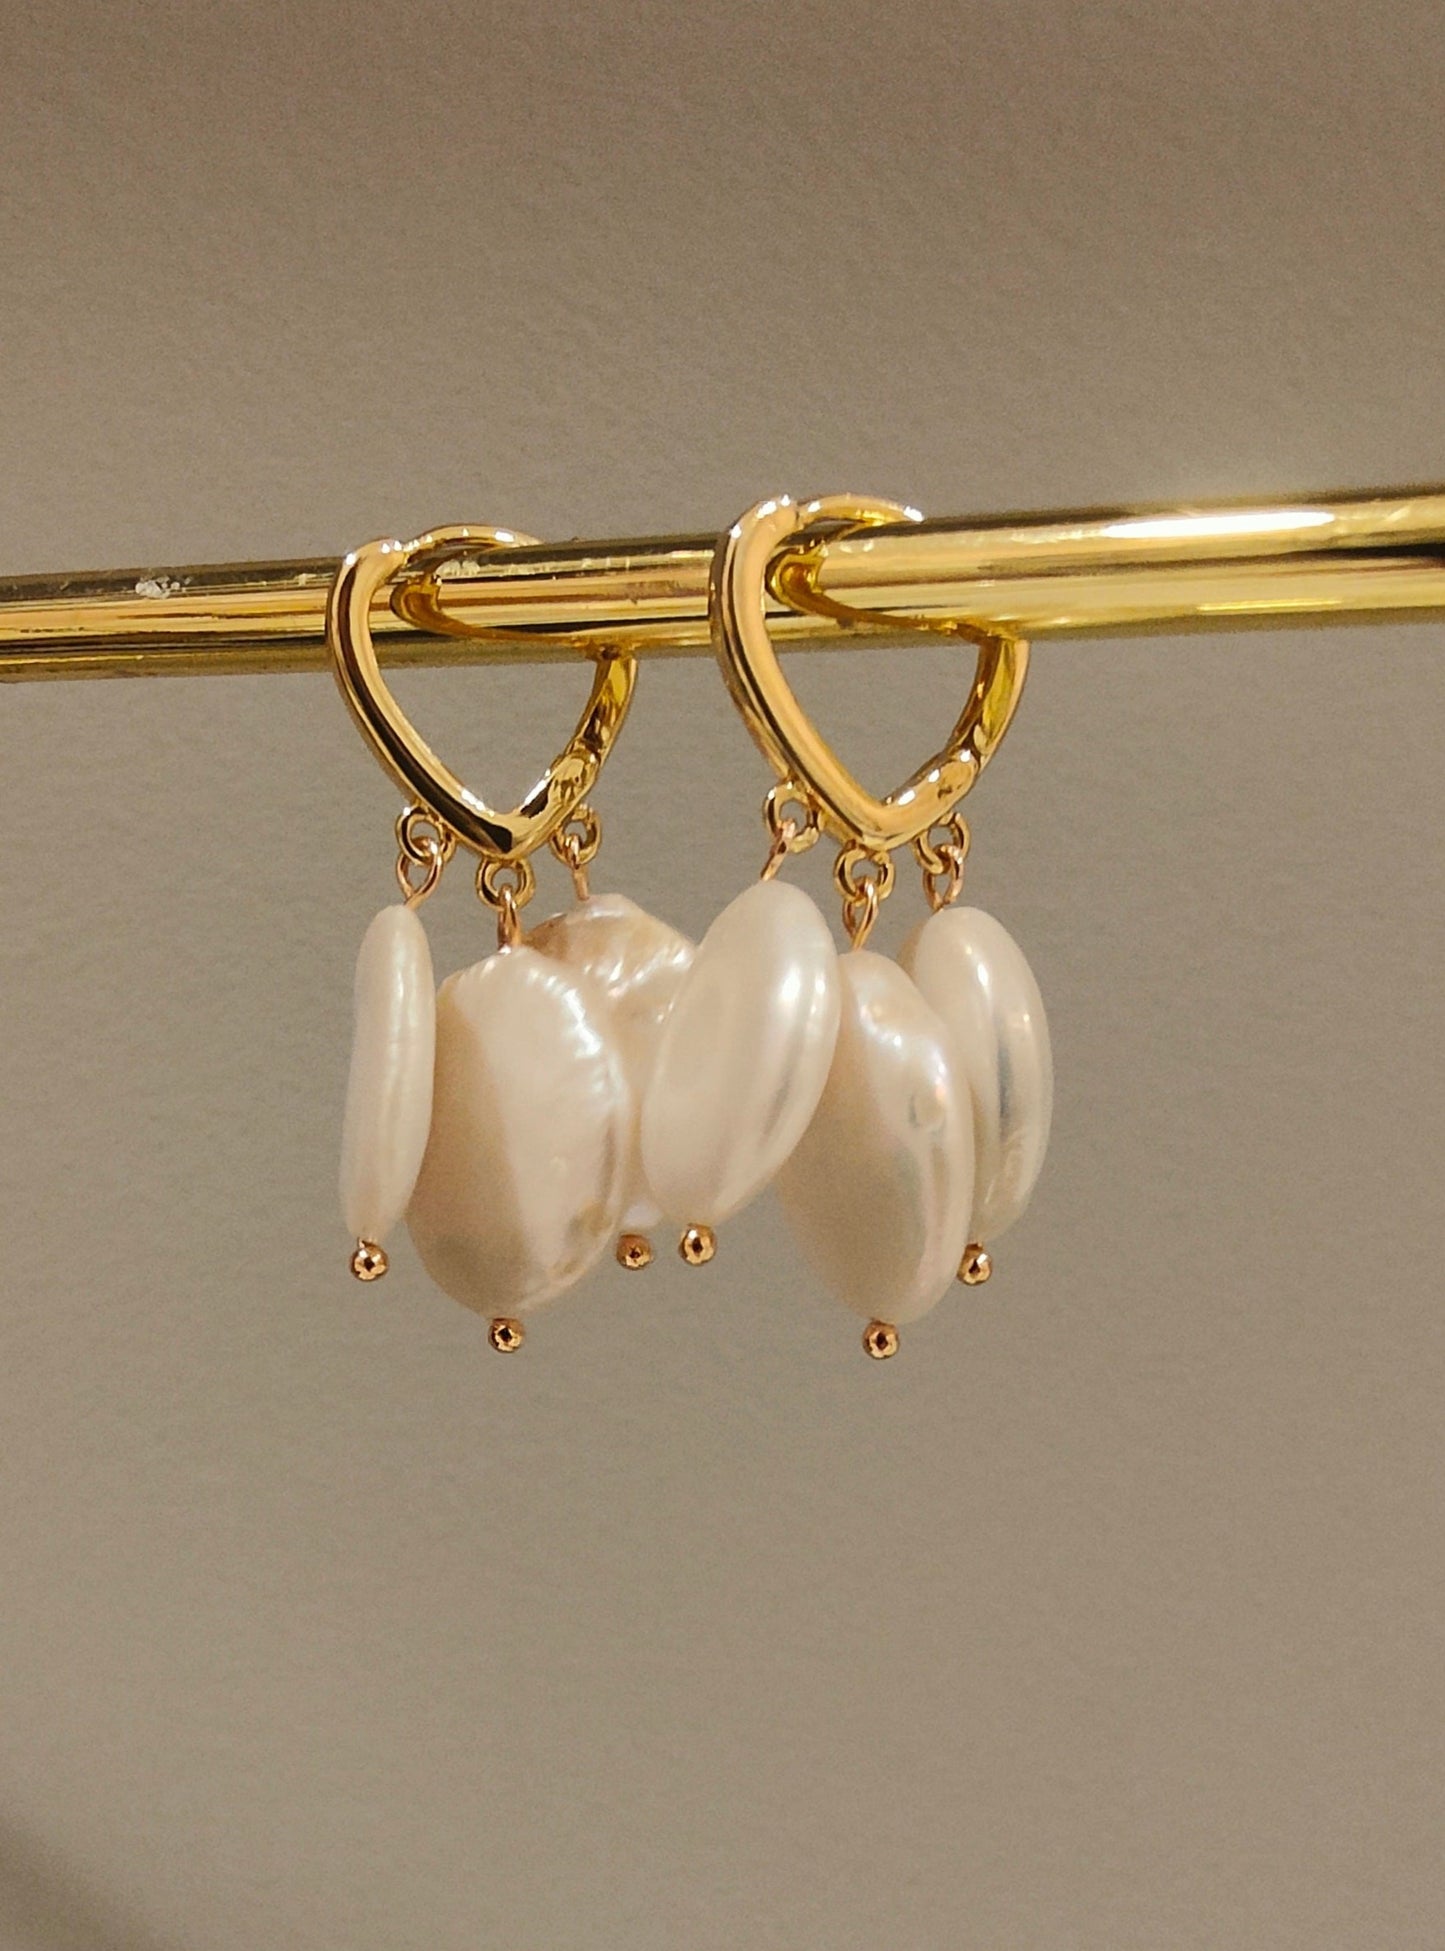 EVELYN - Statement Pearls & Gold Bridal Earrings